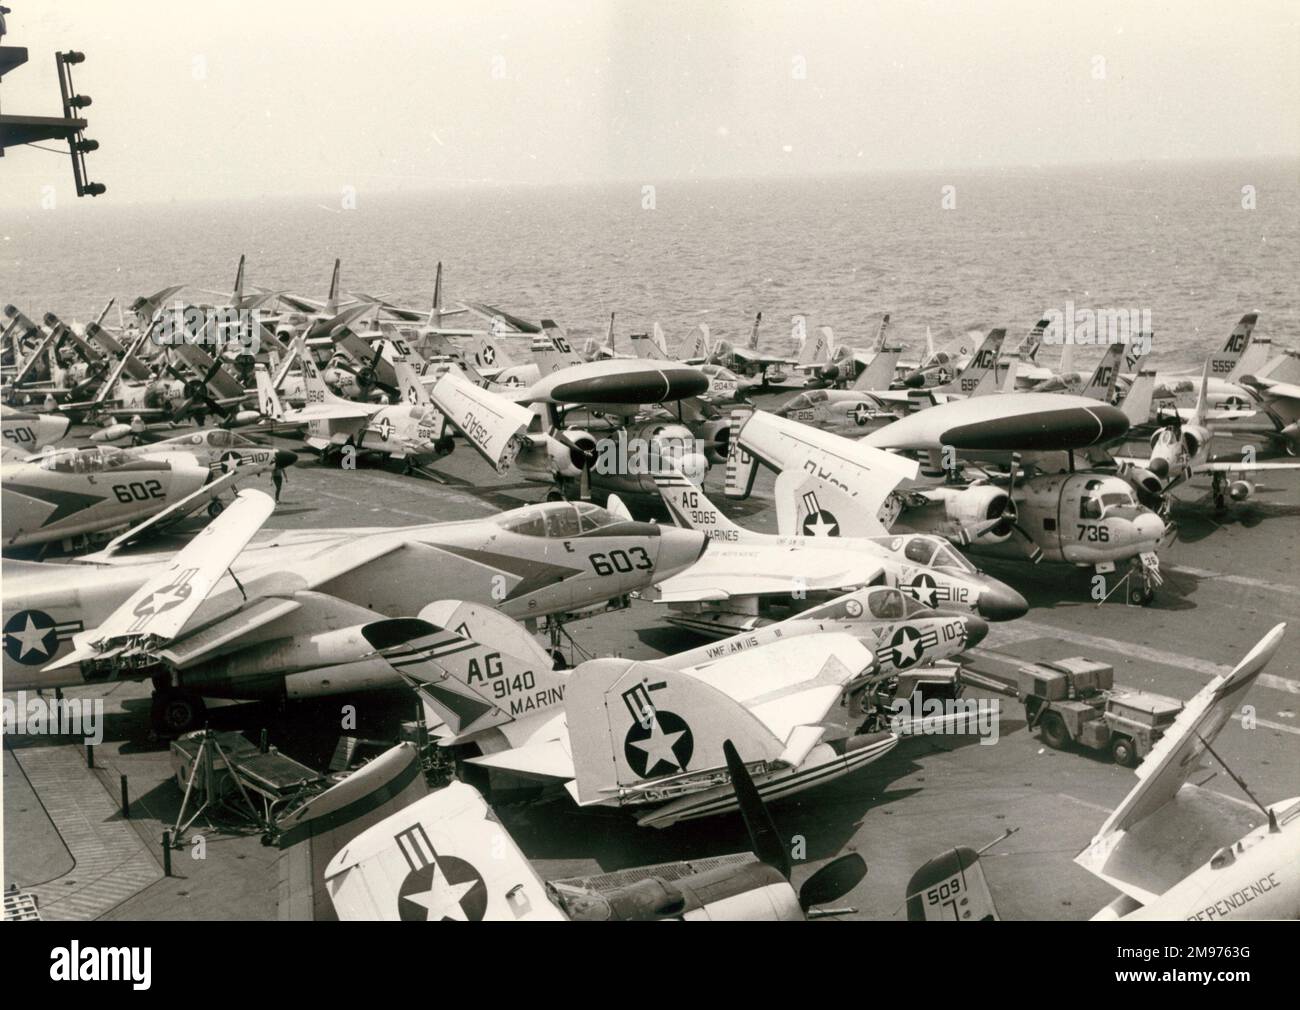 Aircraft on the deck of the USS Independence including Douglas A4D Skyhawks, Douglas A3D Skywarriers, Douglas F4D Skyrays, Grumman WF-2s, Vought F8U Crusaders and Douglas AD-1 Skyraiders. Stock Photo